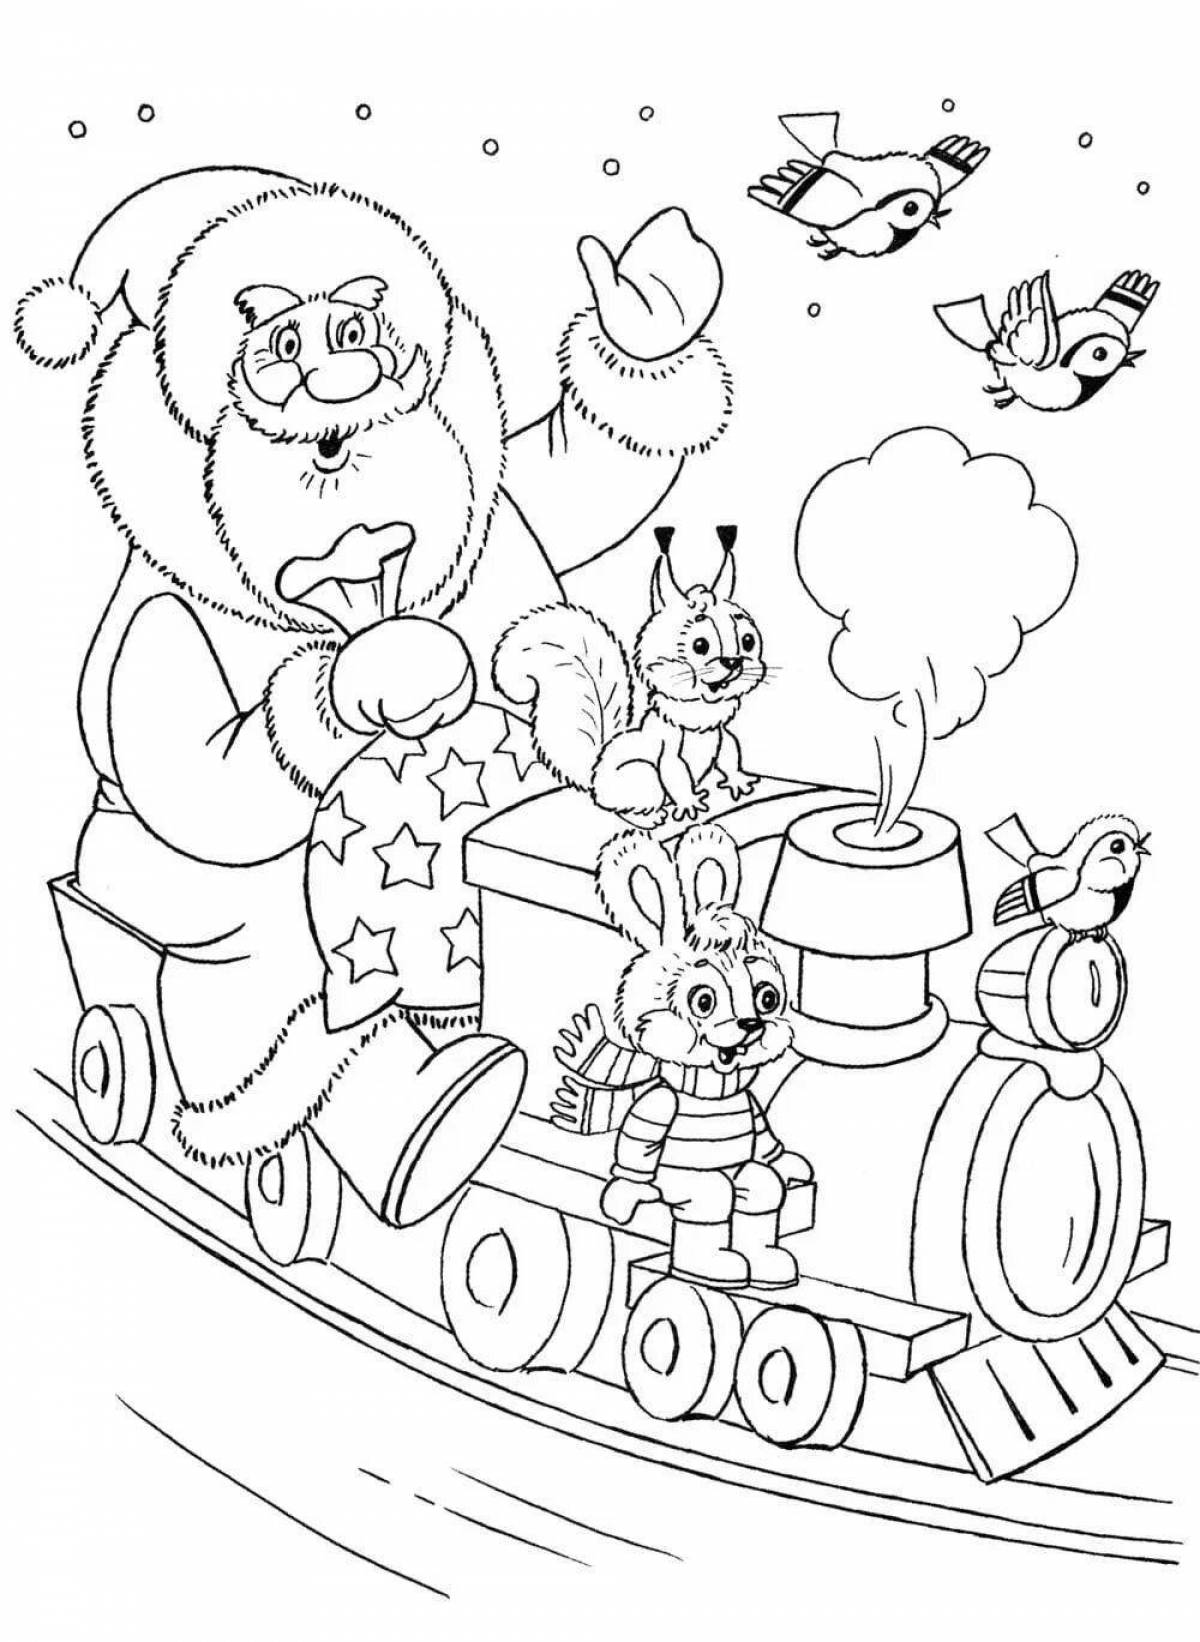 Sparkling Christmas car coloring page